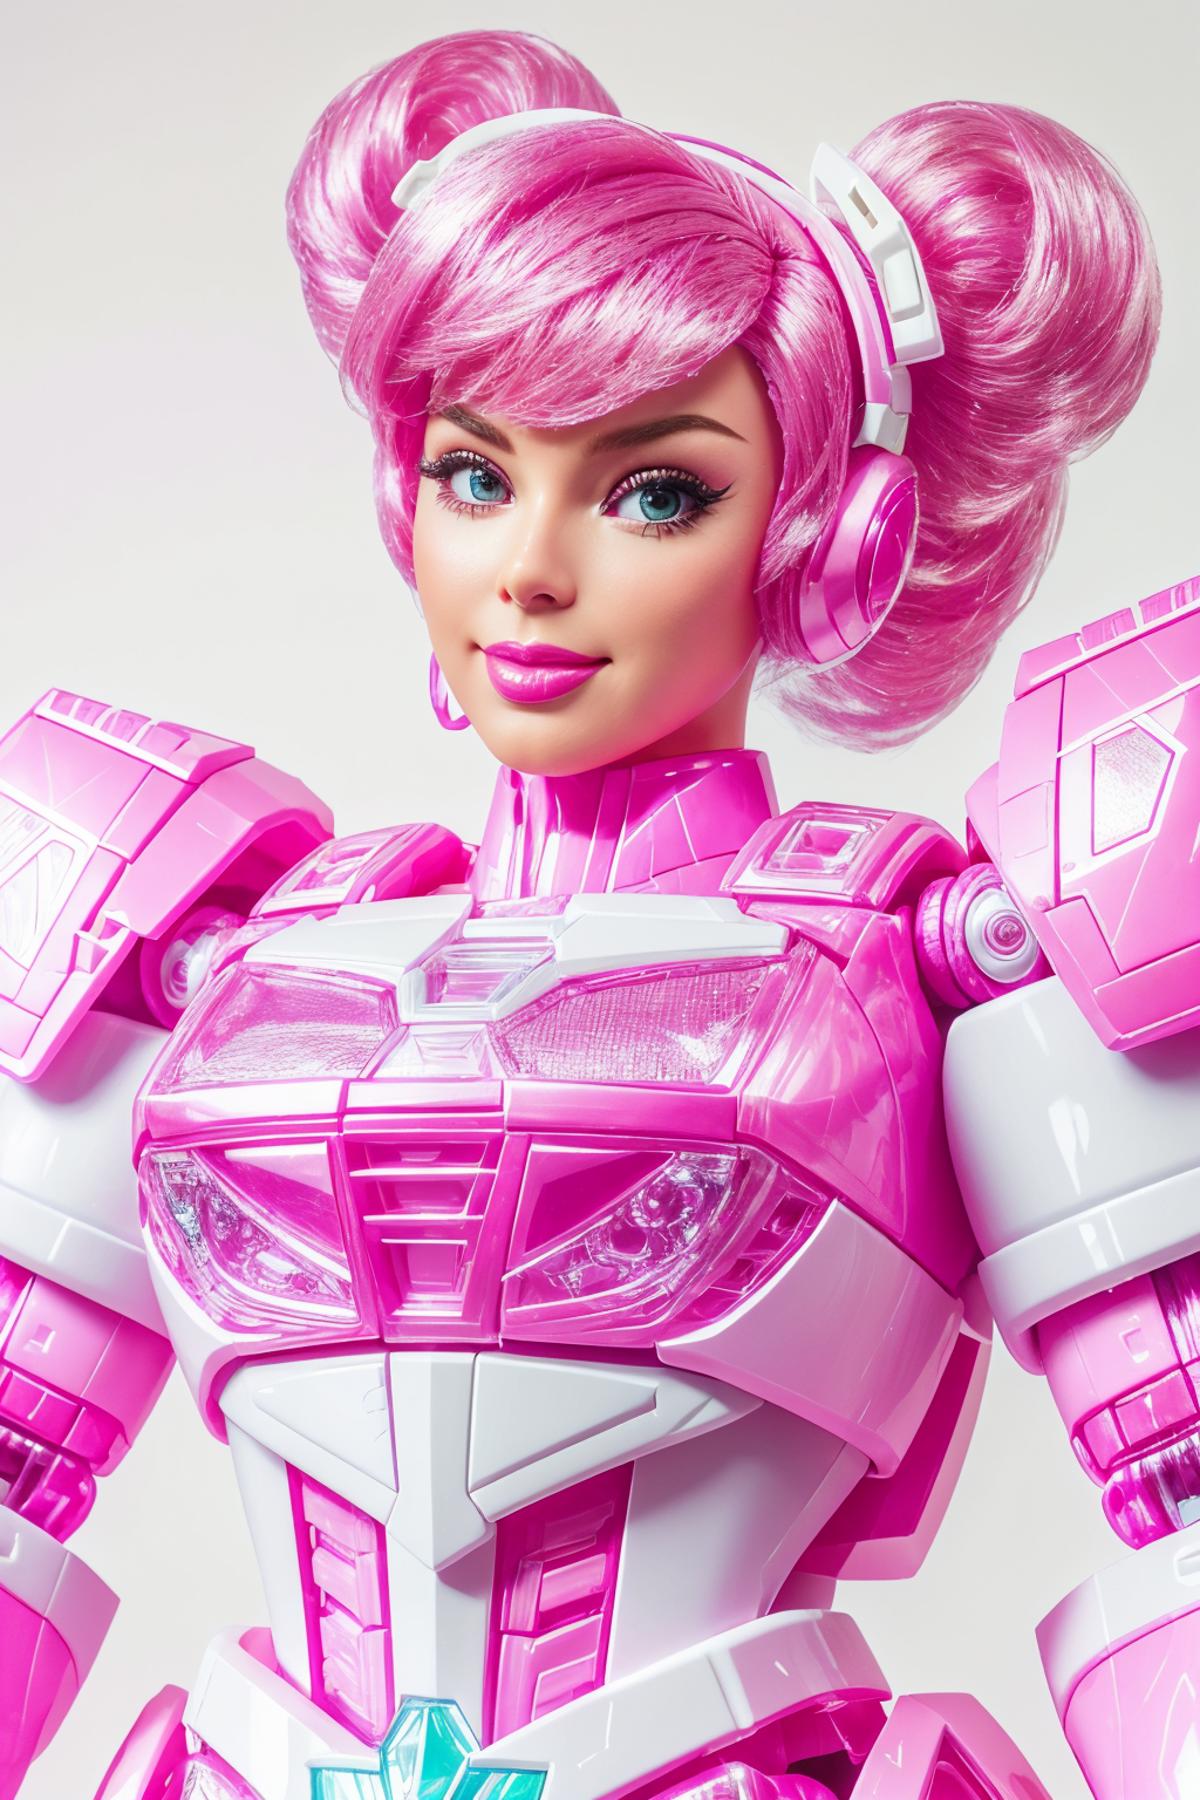 Barbiecore - Barbify Anything! image